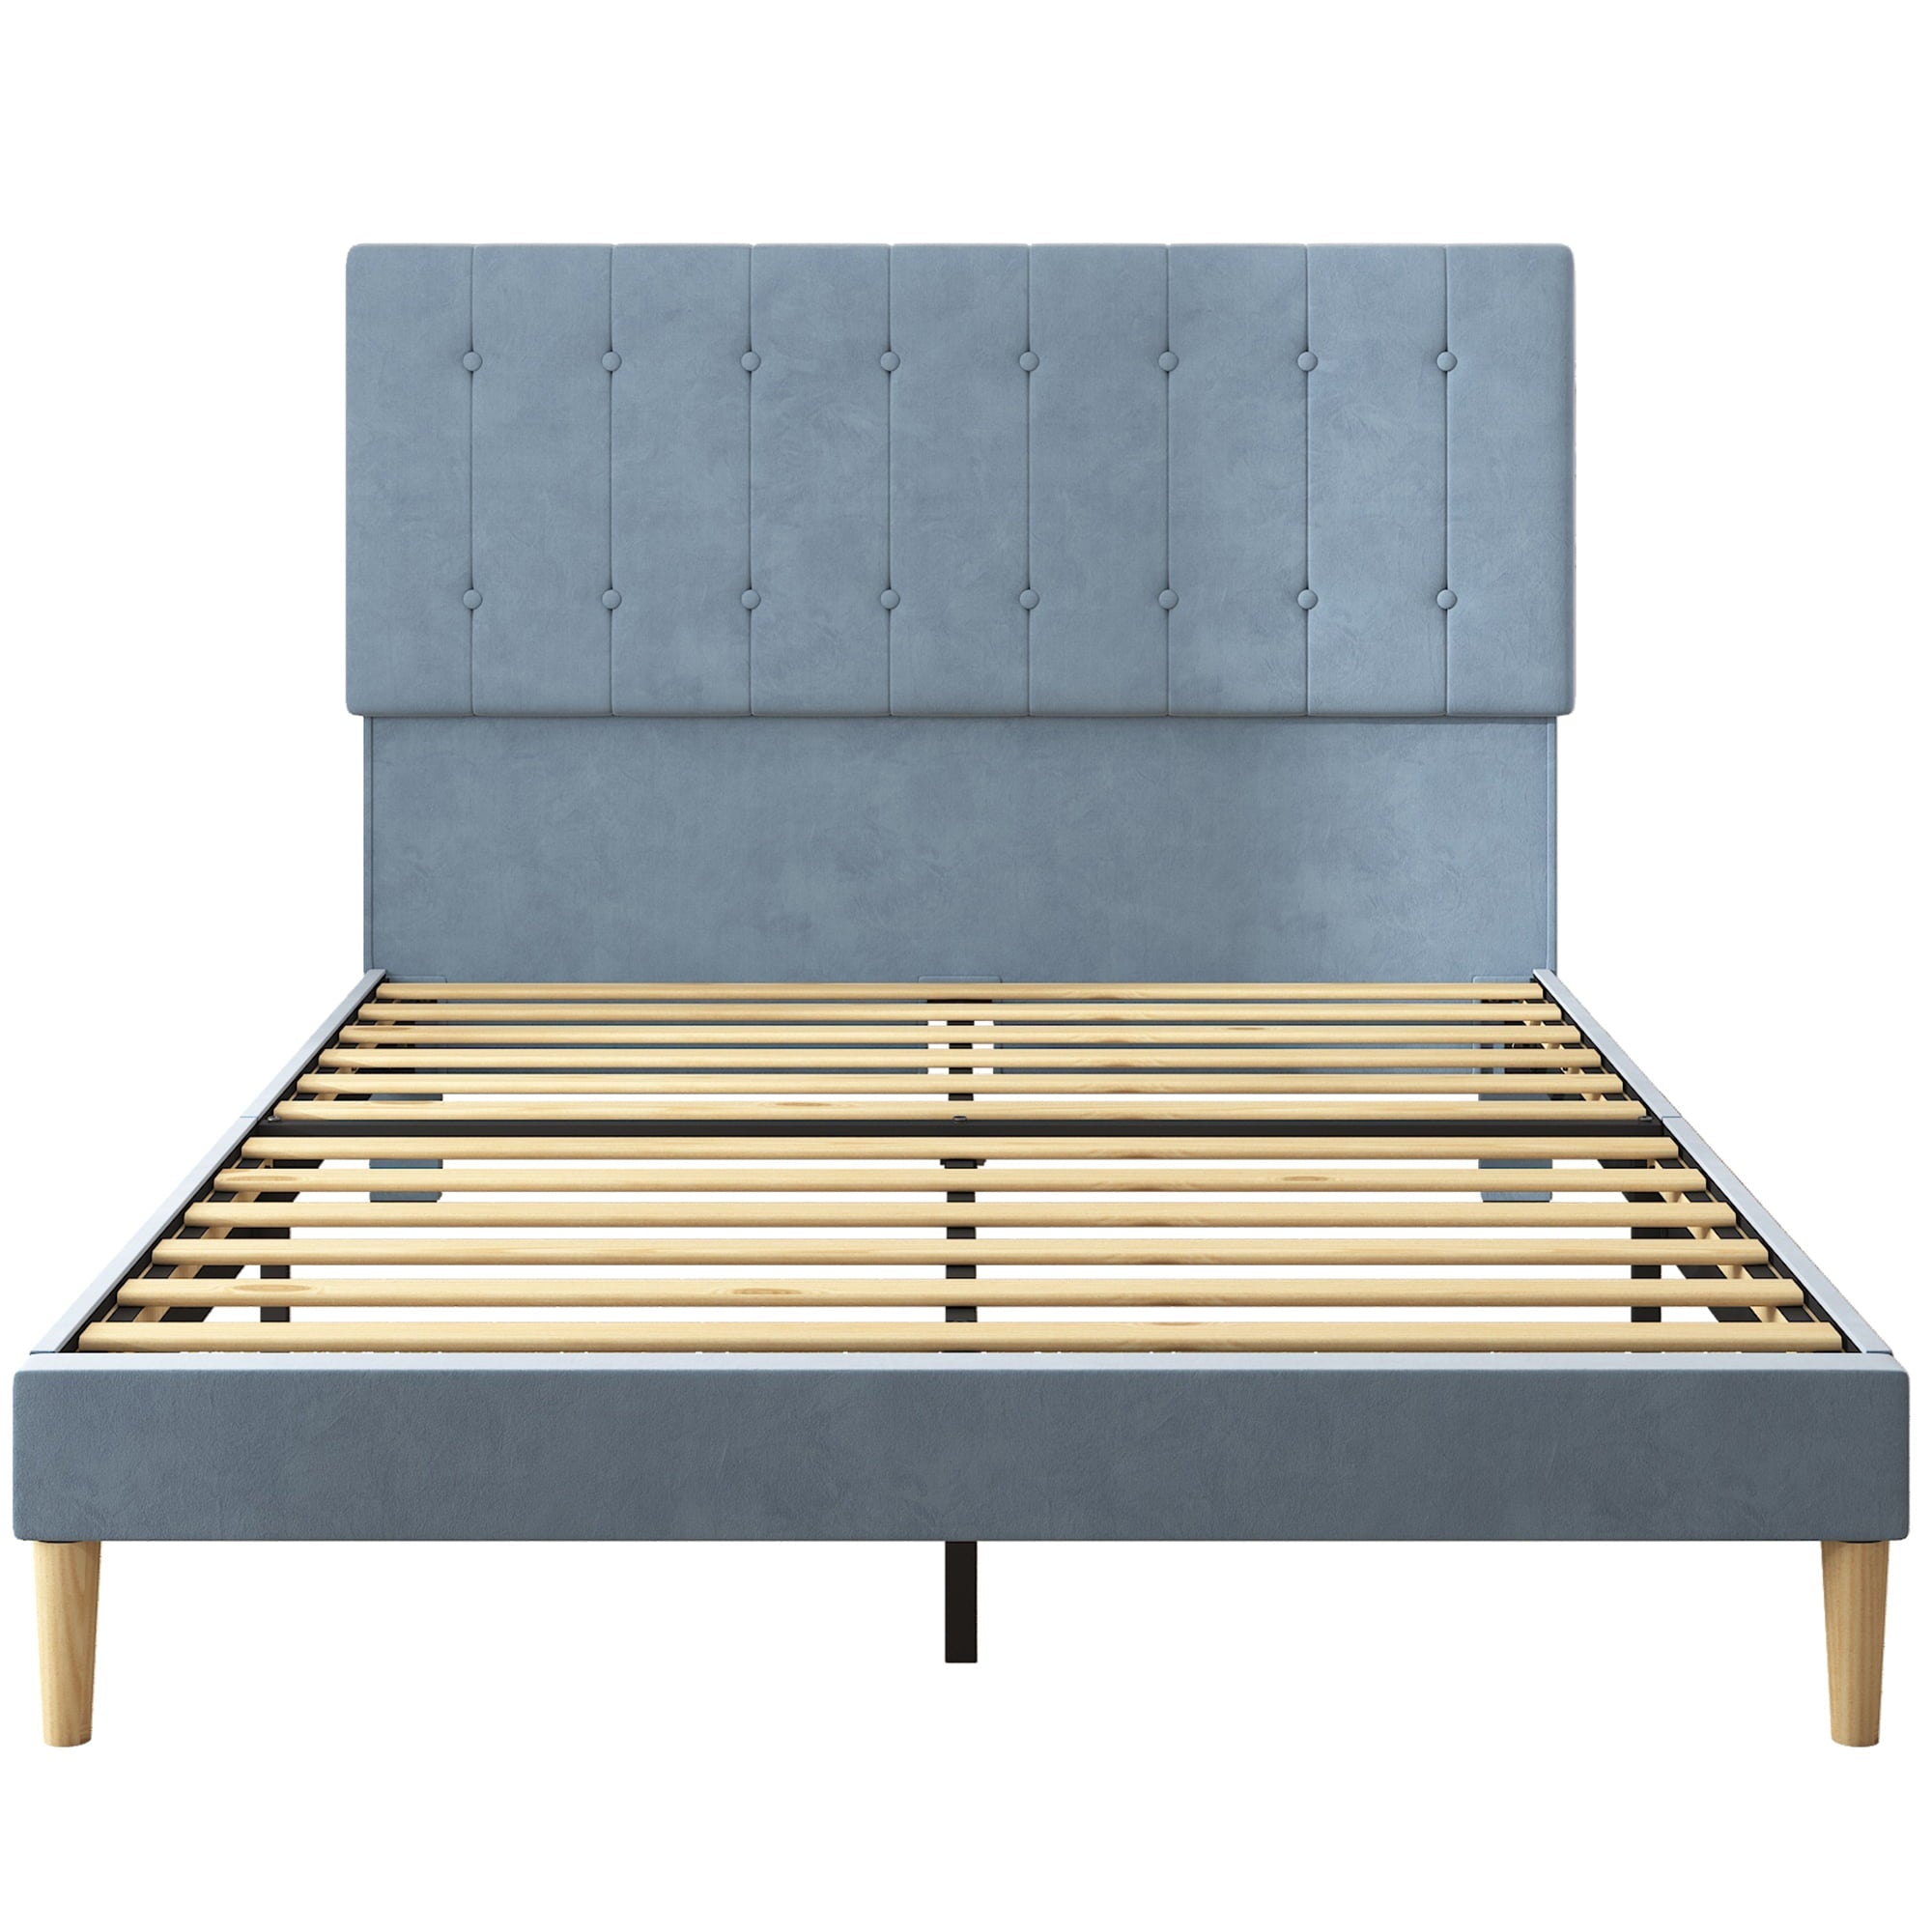 Blue Full Bed Frame for Adults Kids, Modern Fabric Upholstered Platform Bed Frame with Headboard, Full Size Bed Frame Bedroom Furniture with Wood Slats Support, No Box Spring Needed